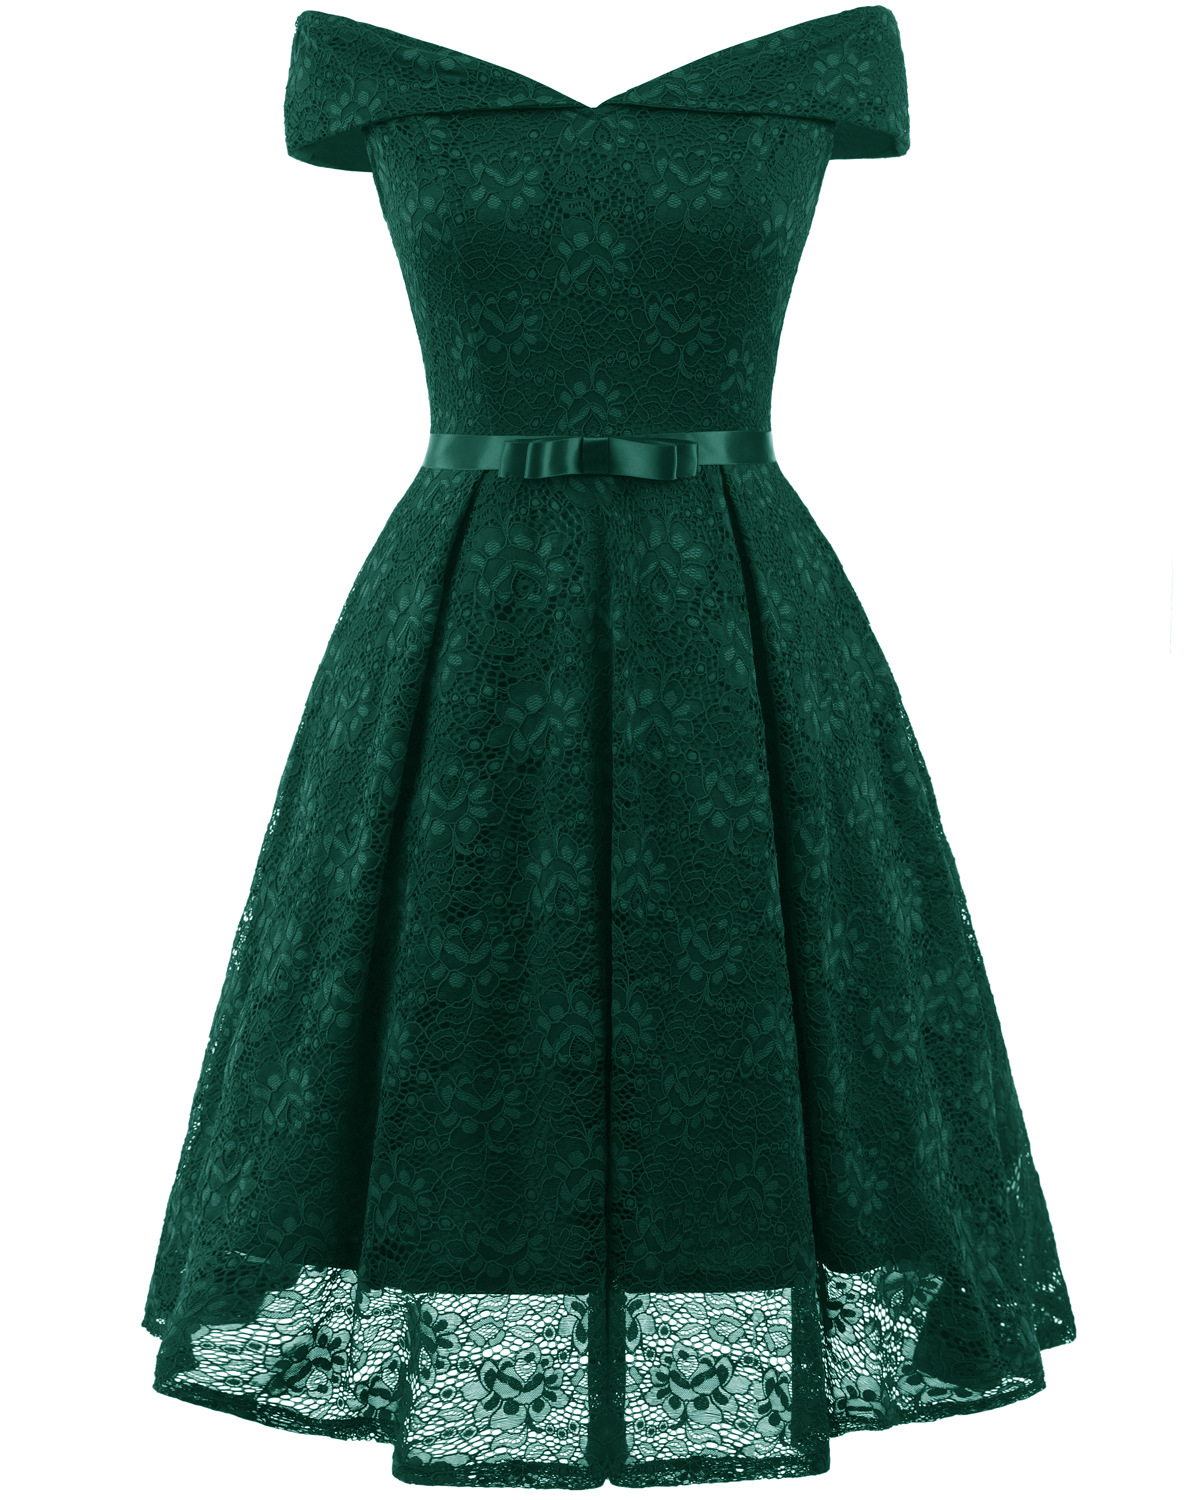 Fashion Green Lace Dress A Line Women Bridesmaid Party Gowns Soft Lace ...